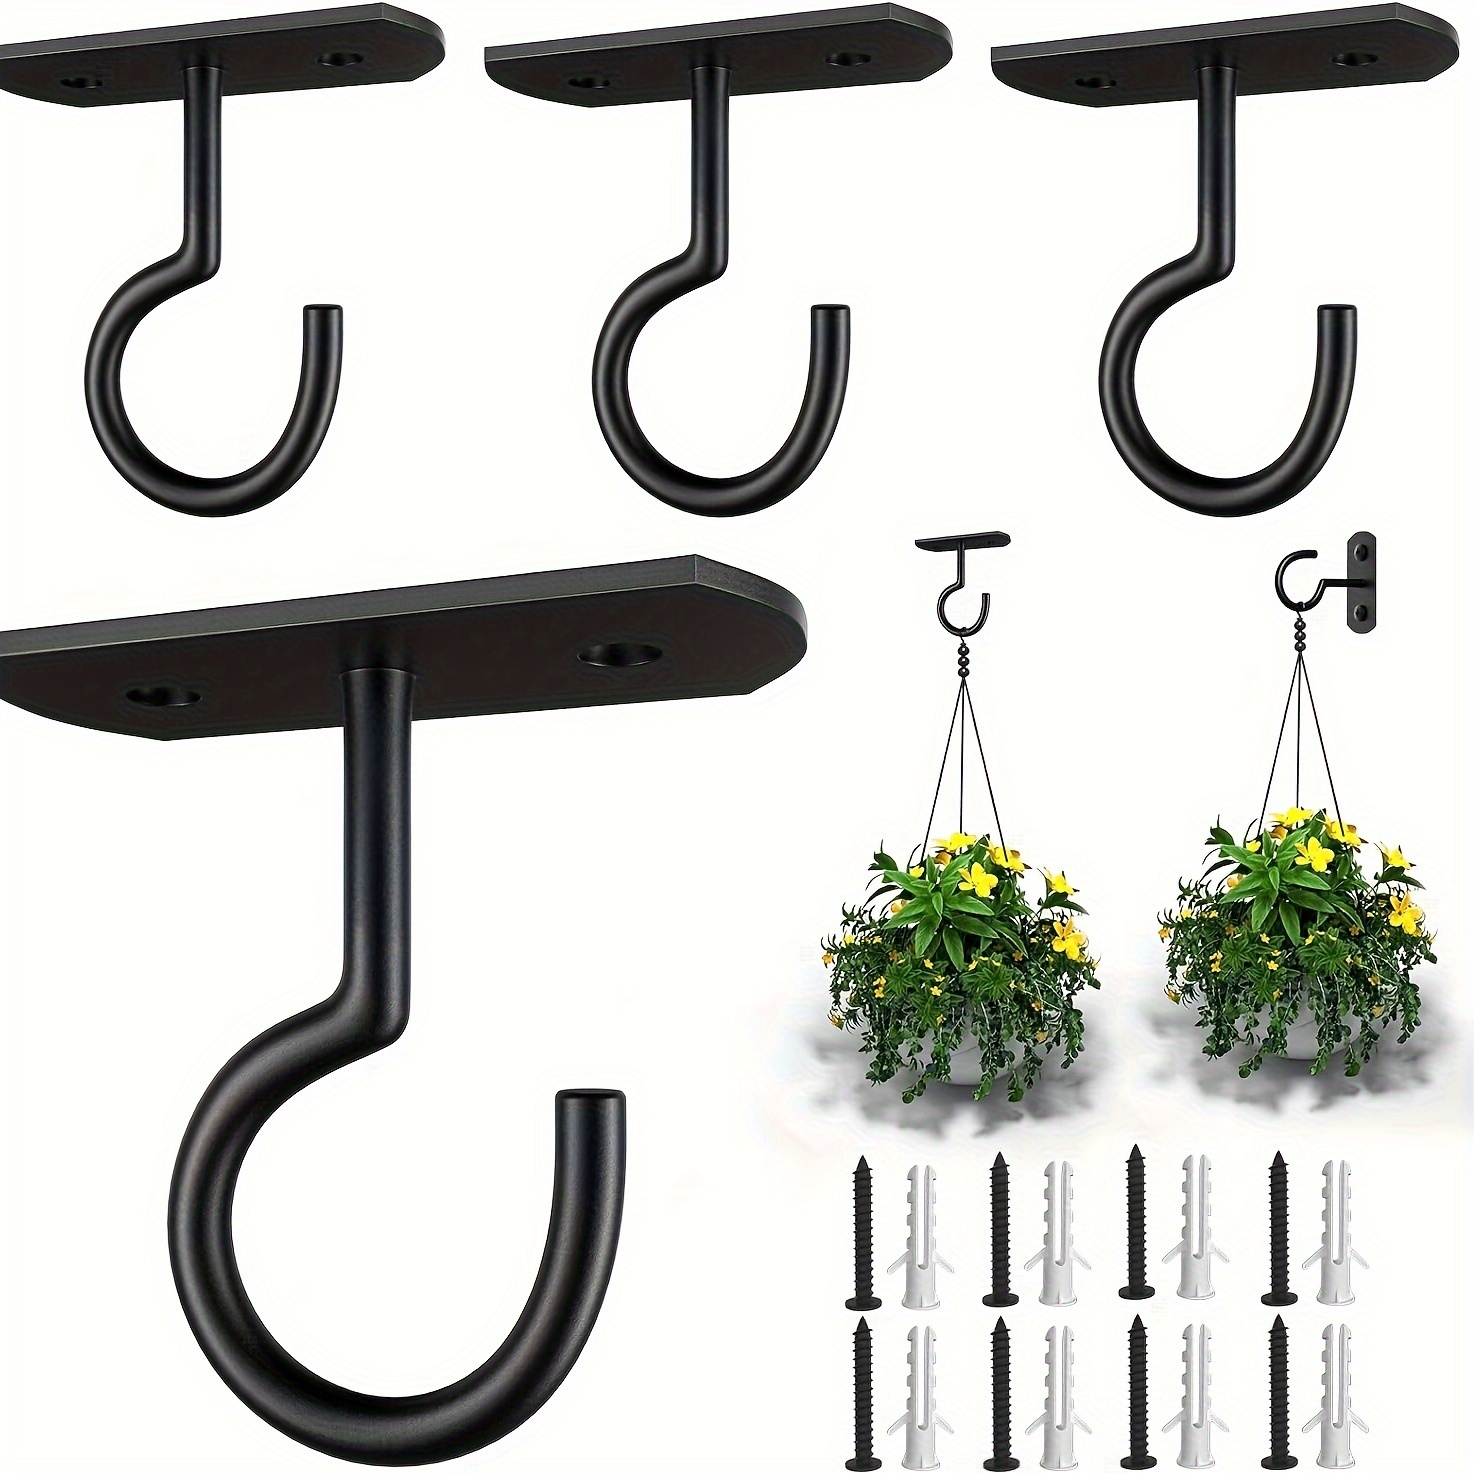 Ibeedow 30 Pcs 2 inch Ceiling Hooks for Hanging Plants - Plant Hooks , Hanging Hooks for Christmas Lights, Cups, Decors - Black Screw in Plant Hanger